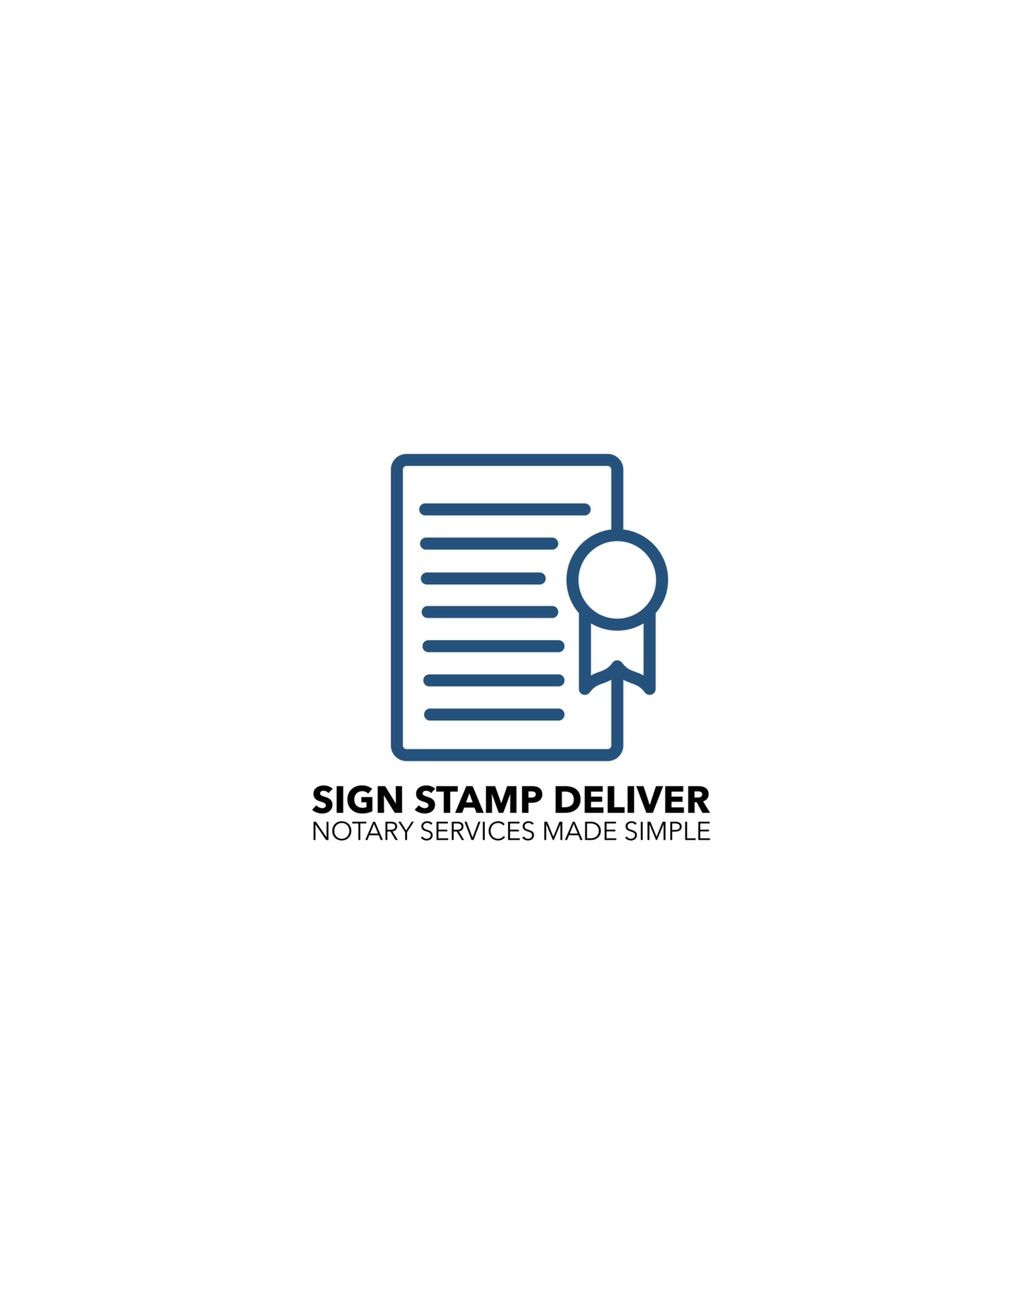 SignStampDeliver | Notary Services made simple